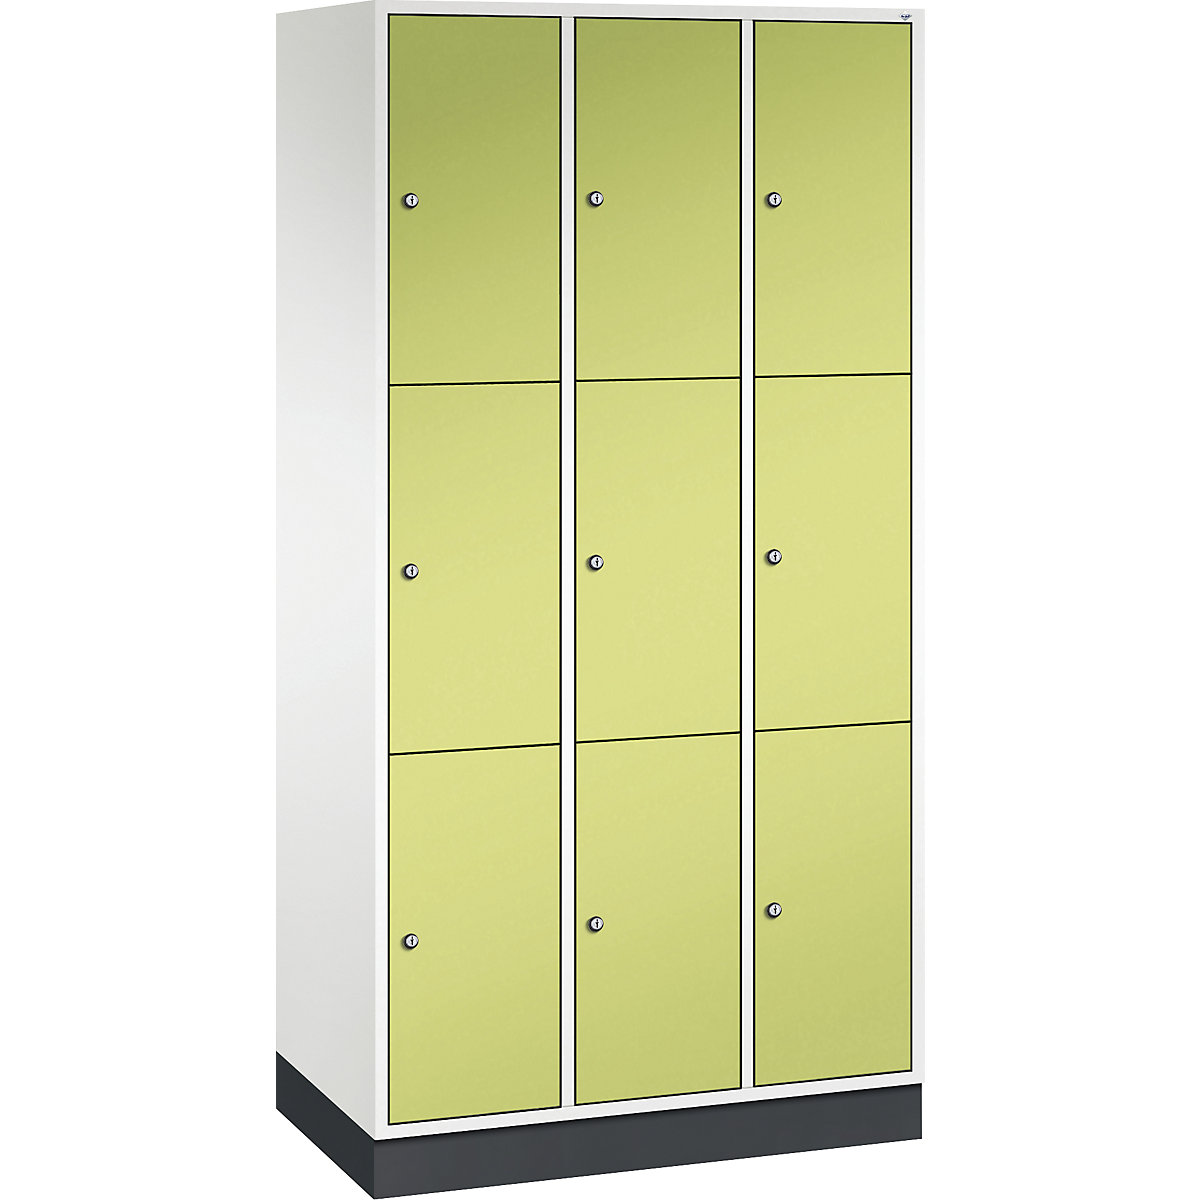 INTRO steel compartment locker, compartment height 580 mm – C+P